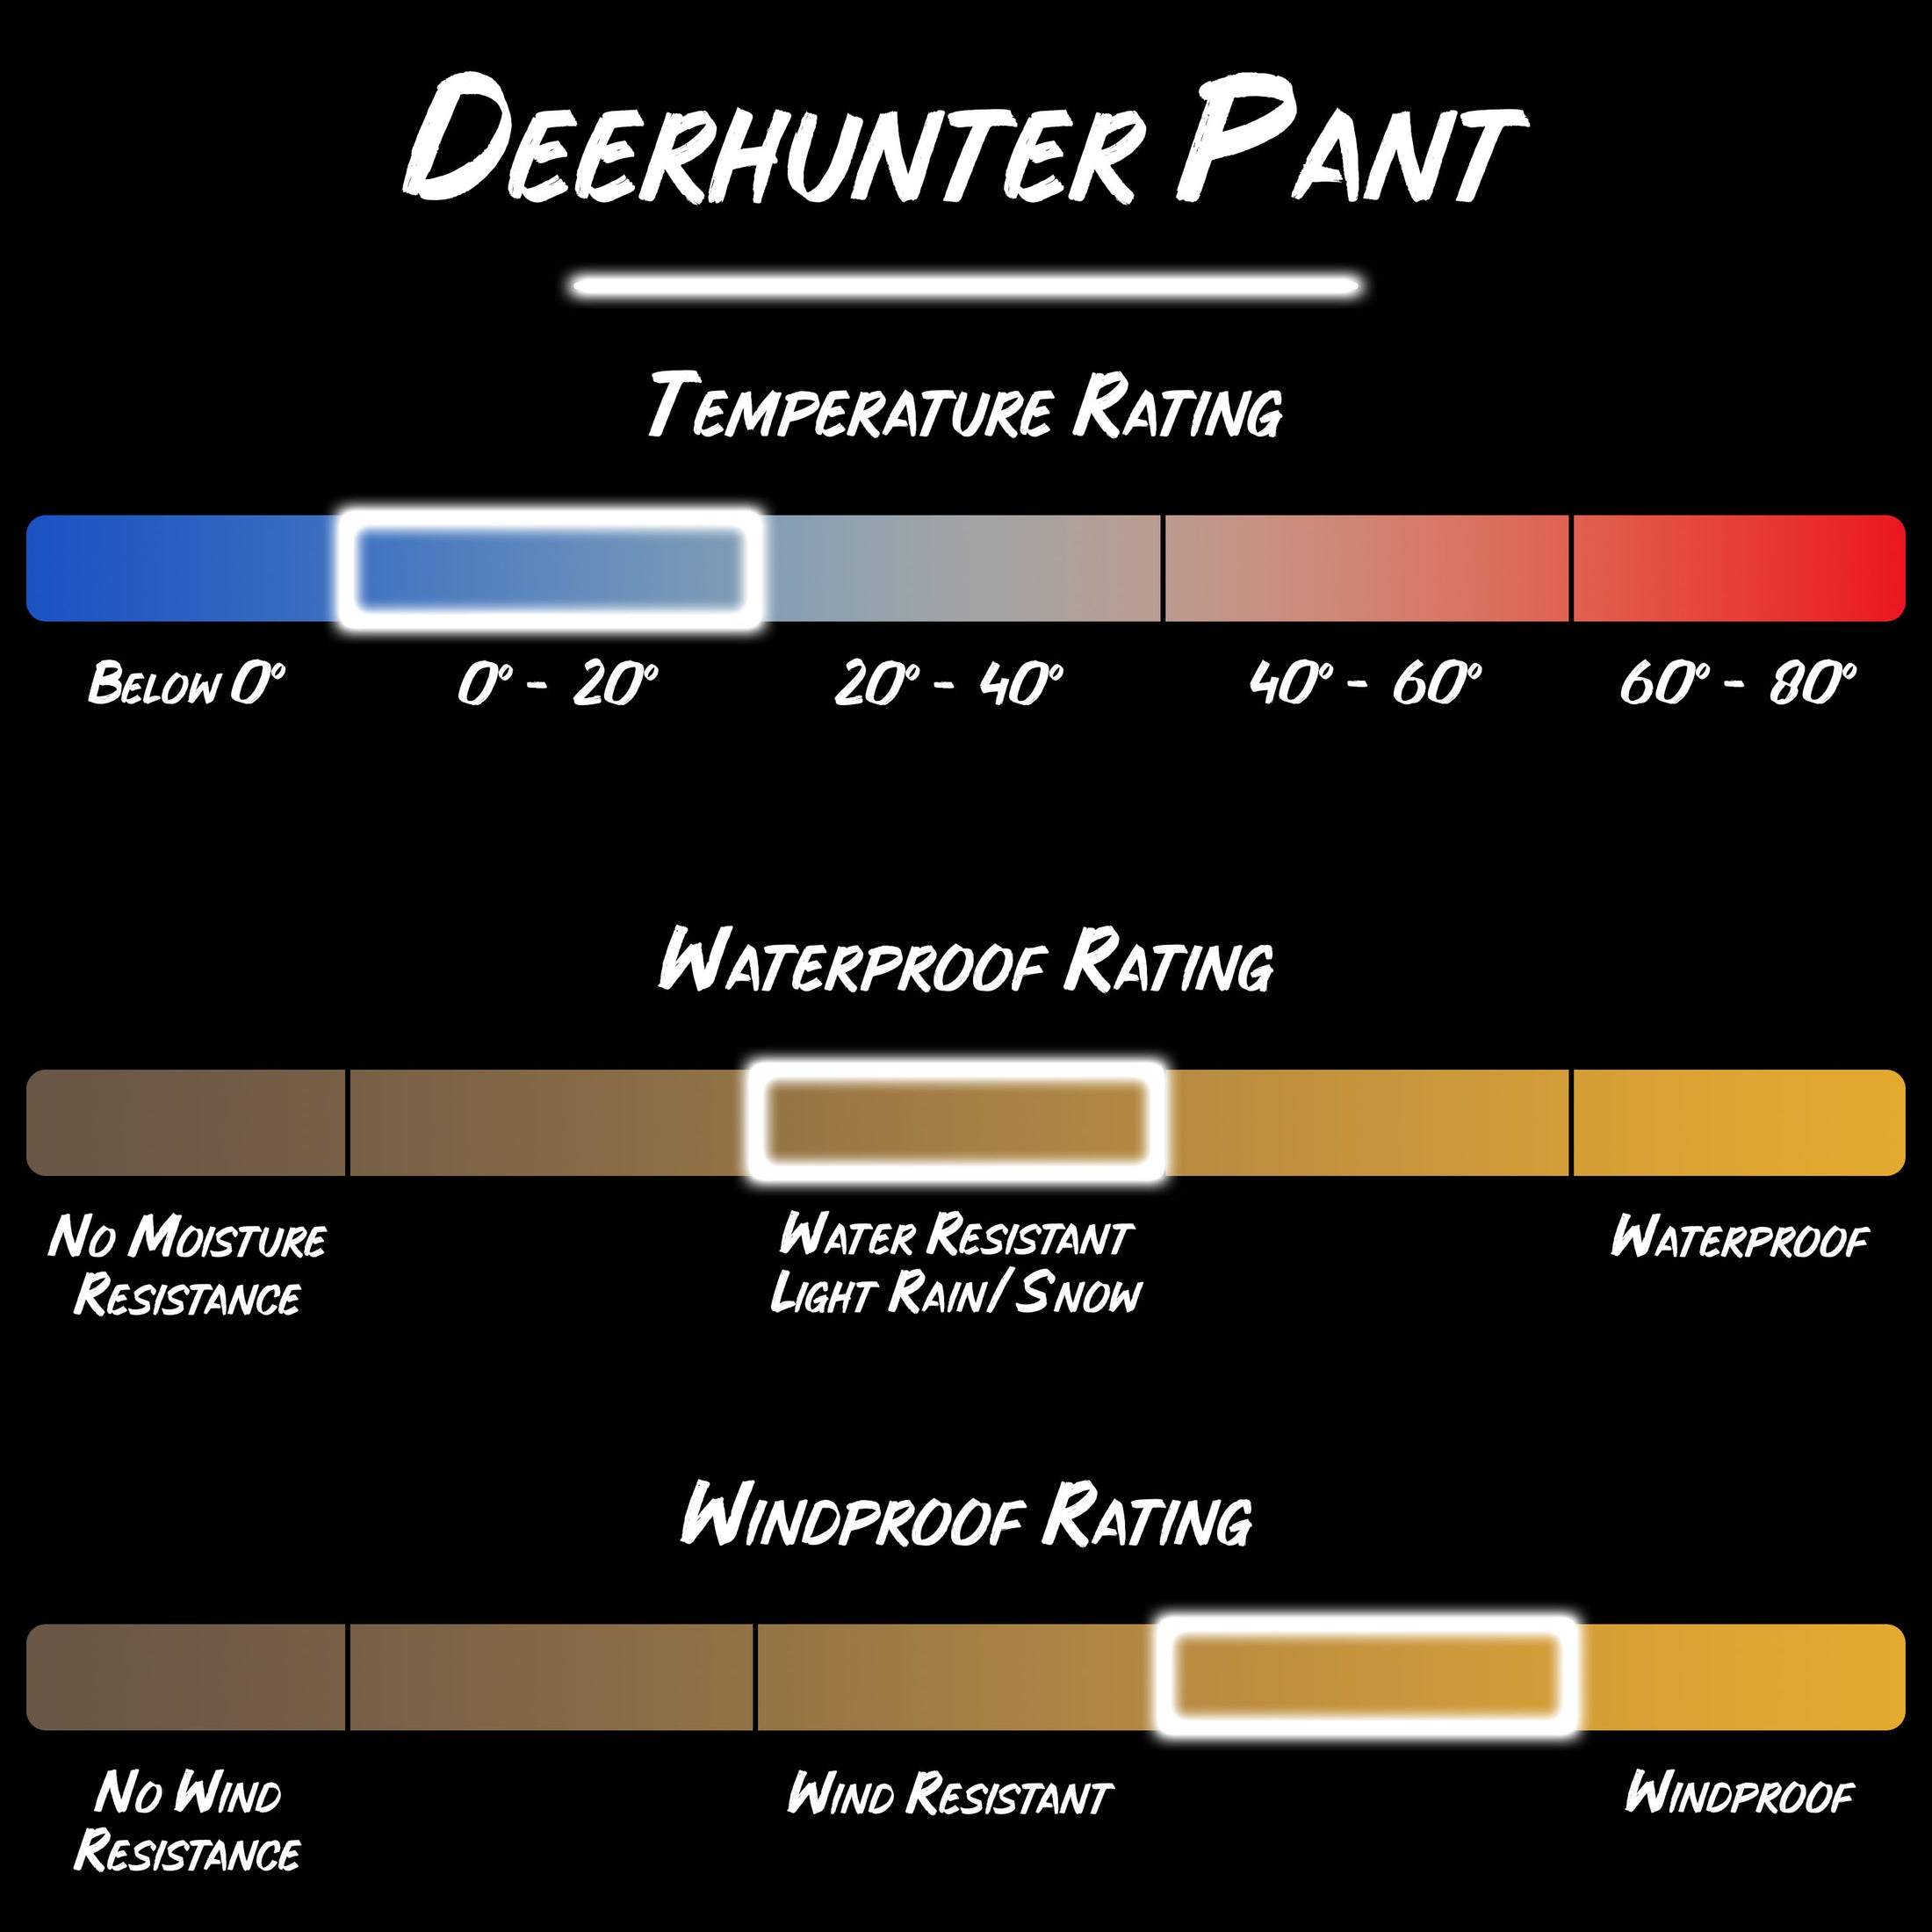 Gamehide deer hunter pant product specifications